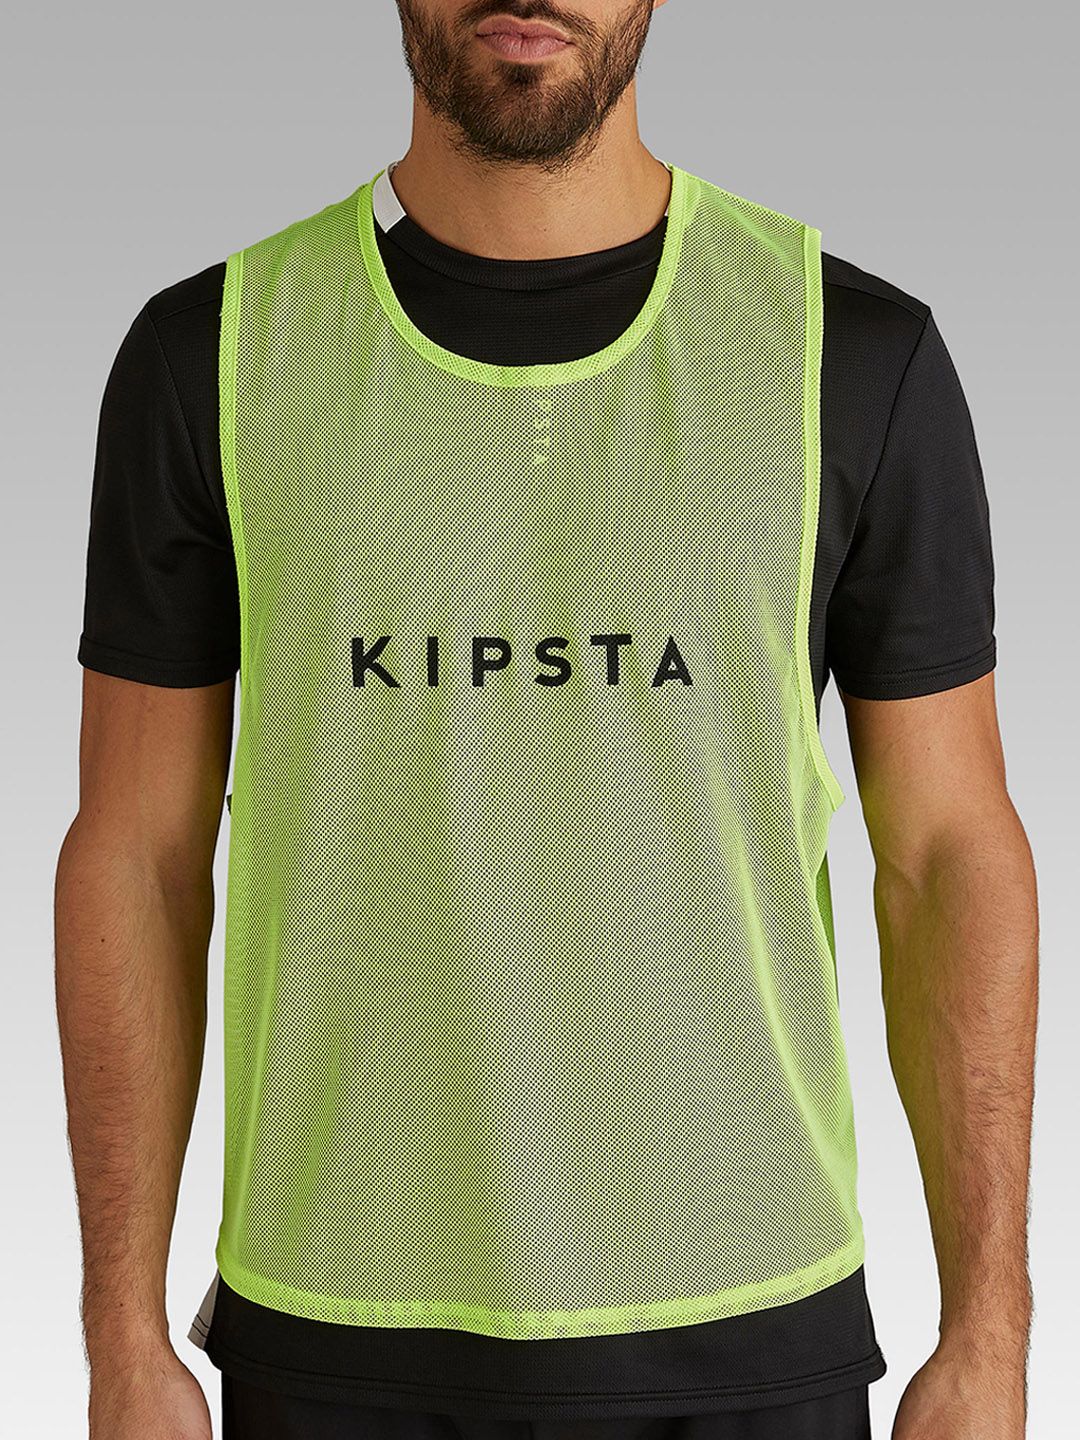 Kipsta By Decathlon Unisex Lime Green Printed Round Football Bibs Price in India